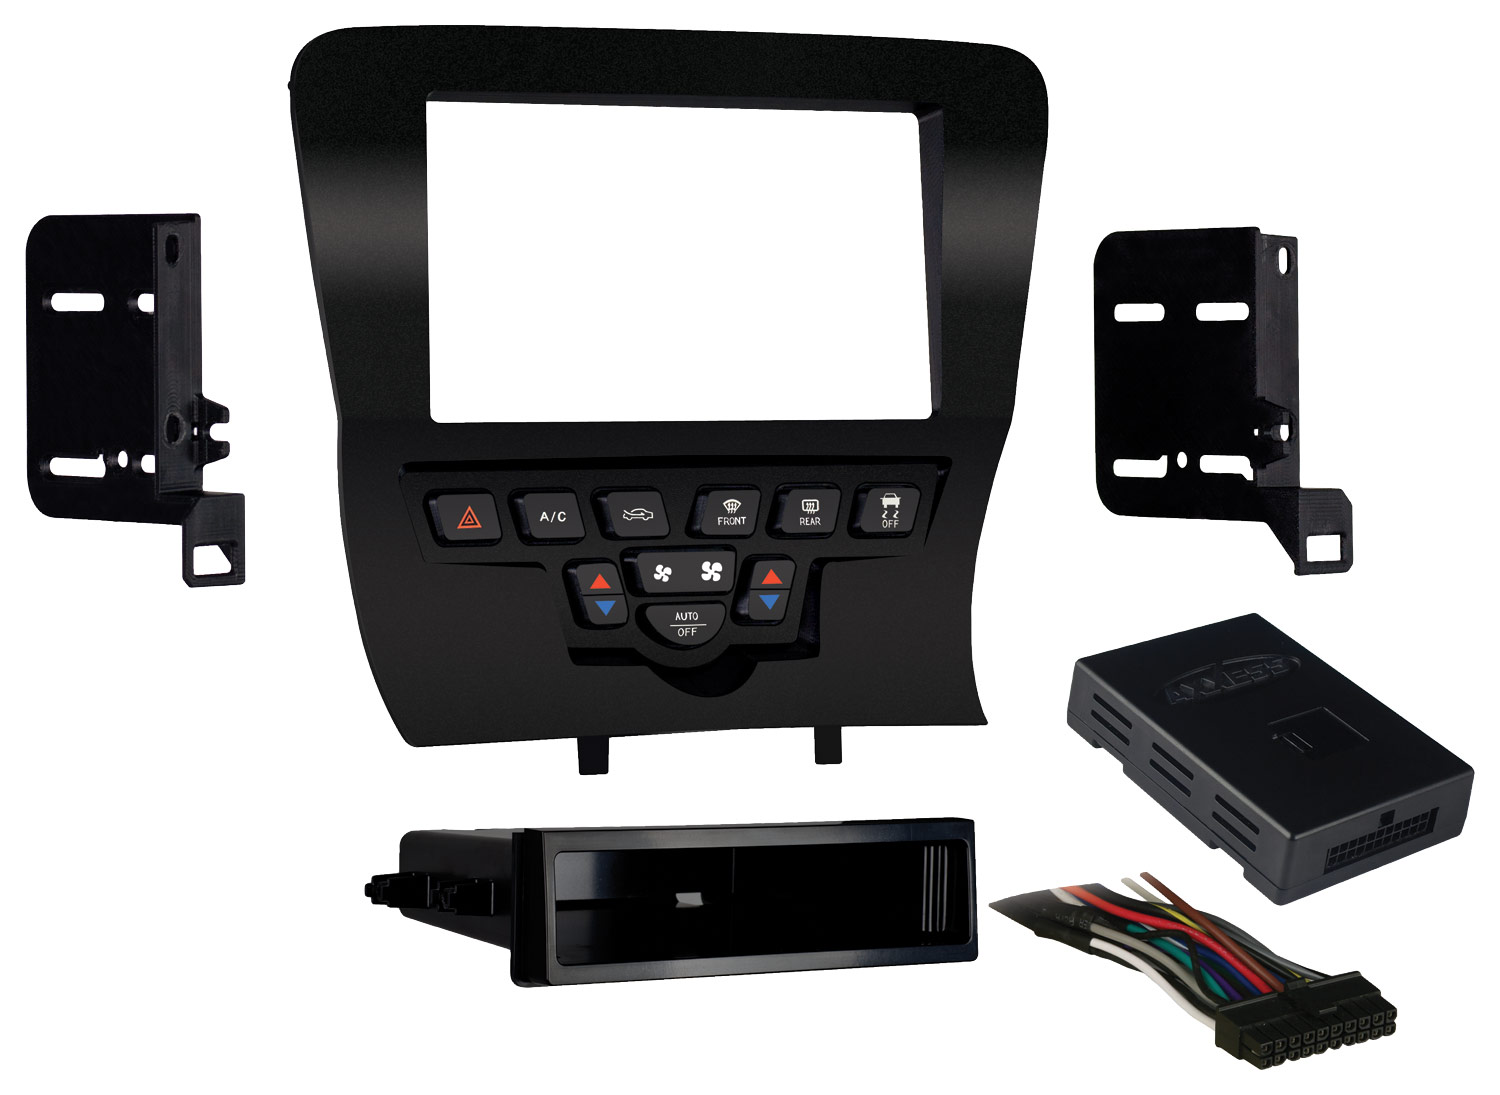 Metra - Dash Kit for Select 2011-2014 Dodge Charger with 4.3 inch screen - Matte Black